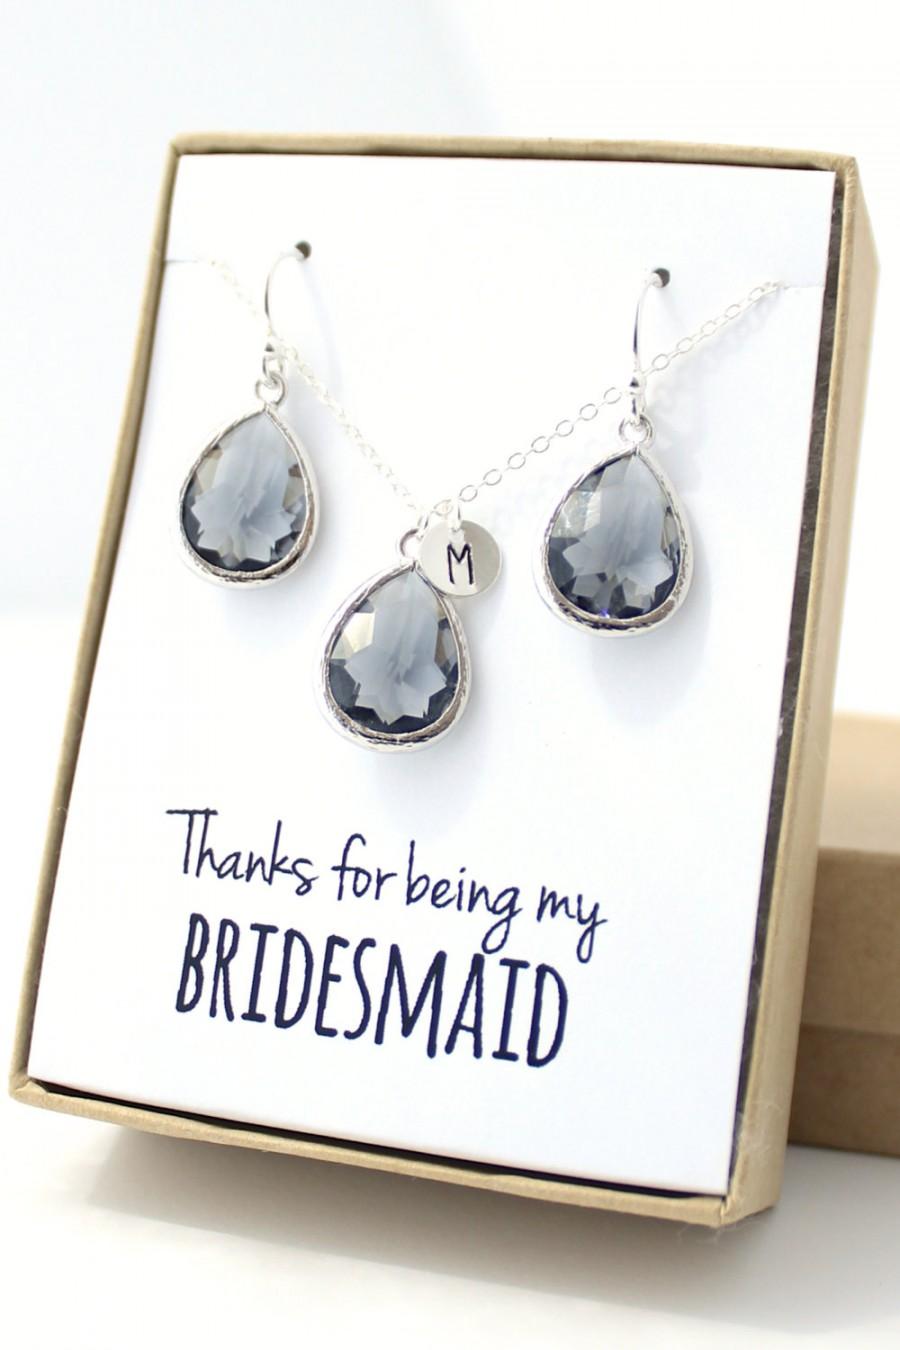 Wedding - Charcoal Gray / Silver Teardrop Necklace and Earring Set - Bridesmaid Gift - Charcoal Bridesmaid Set - Bridesmaid Jewelry Set - ENB1